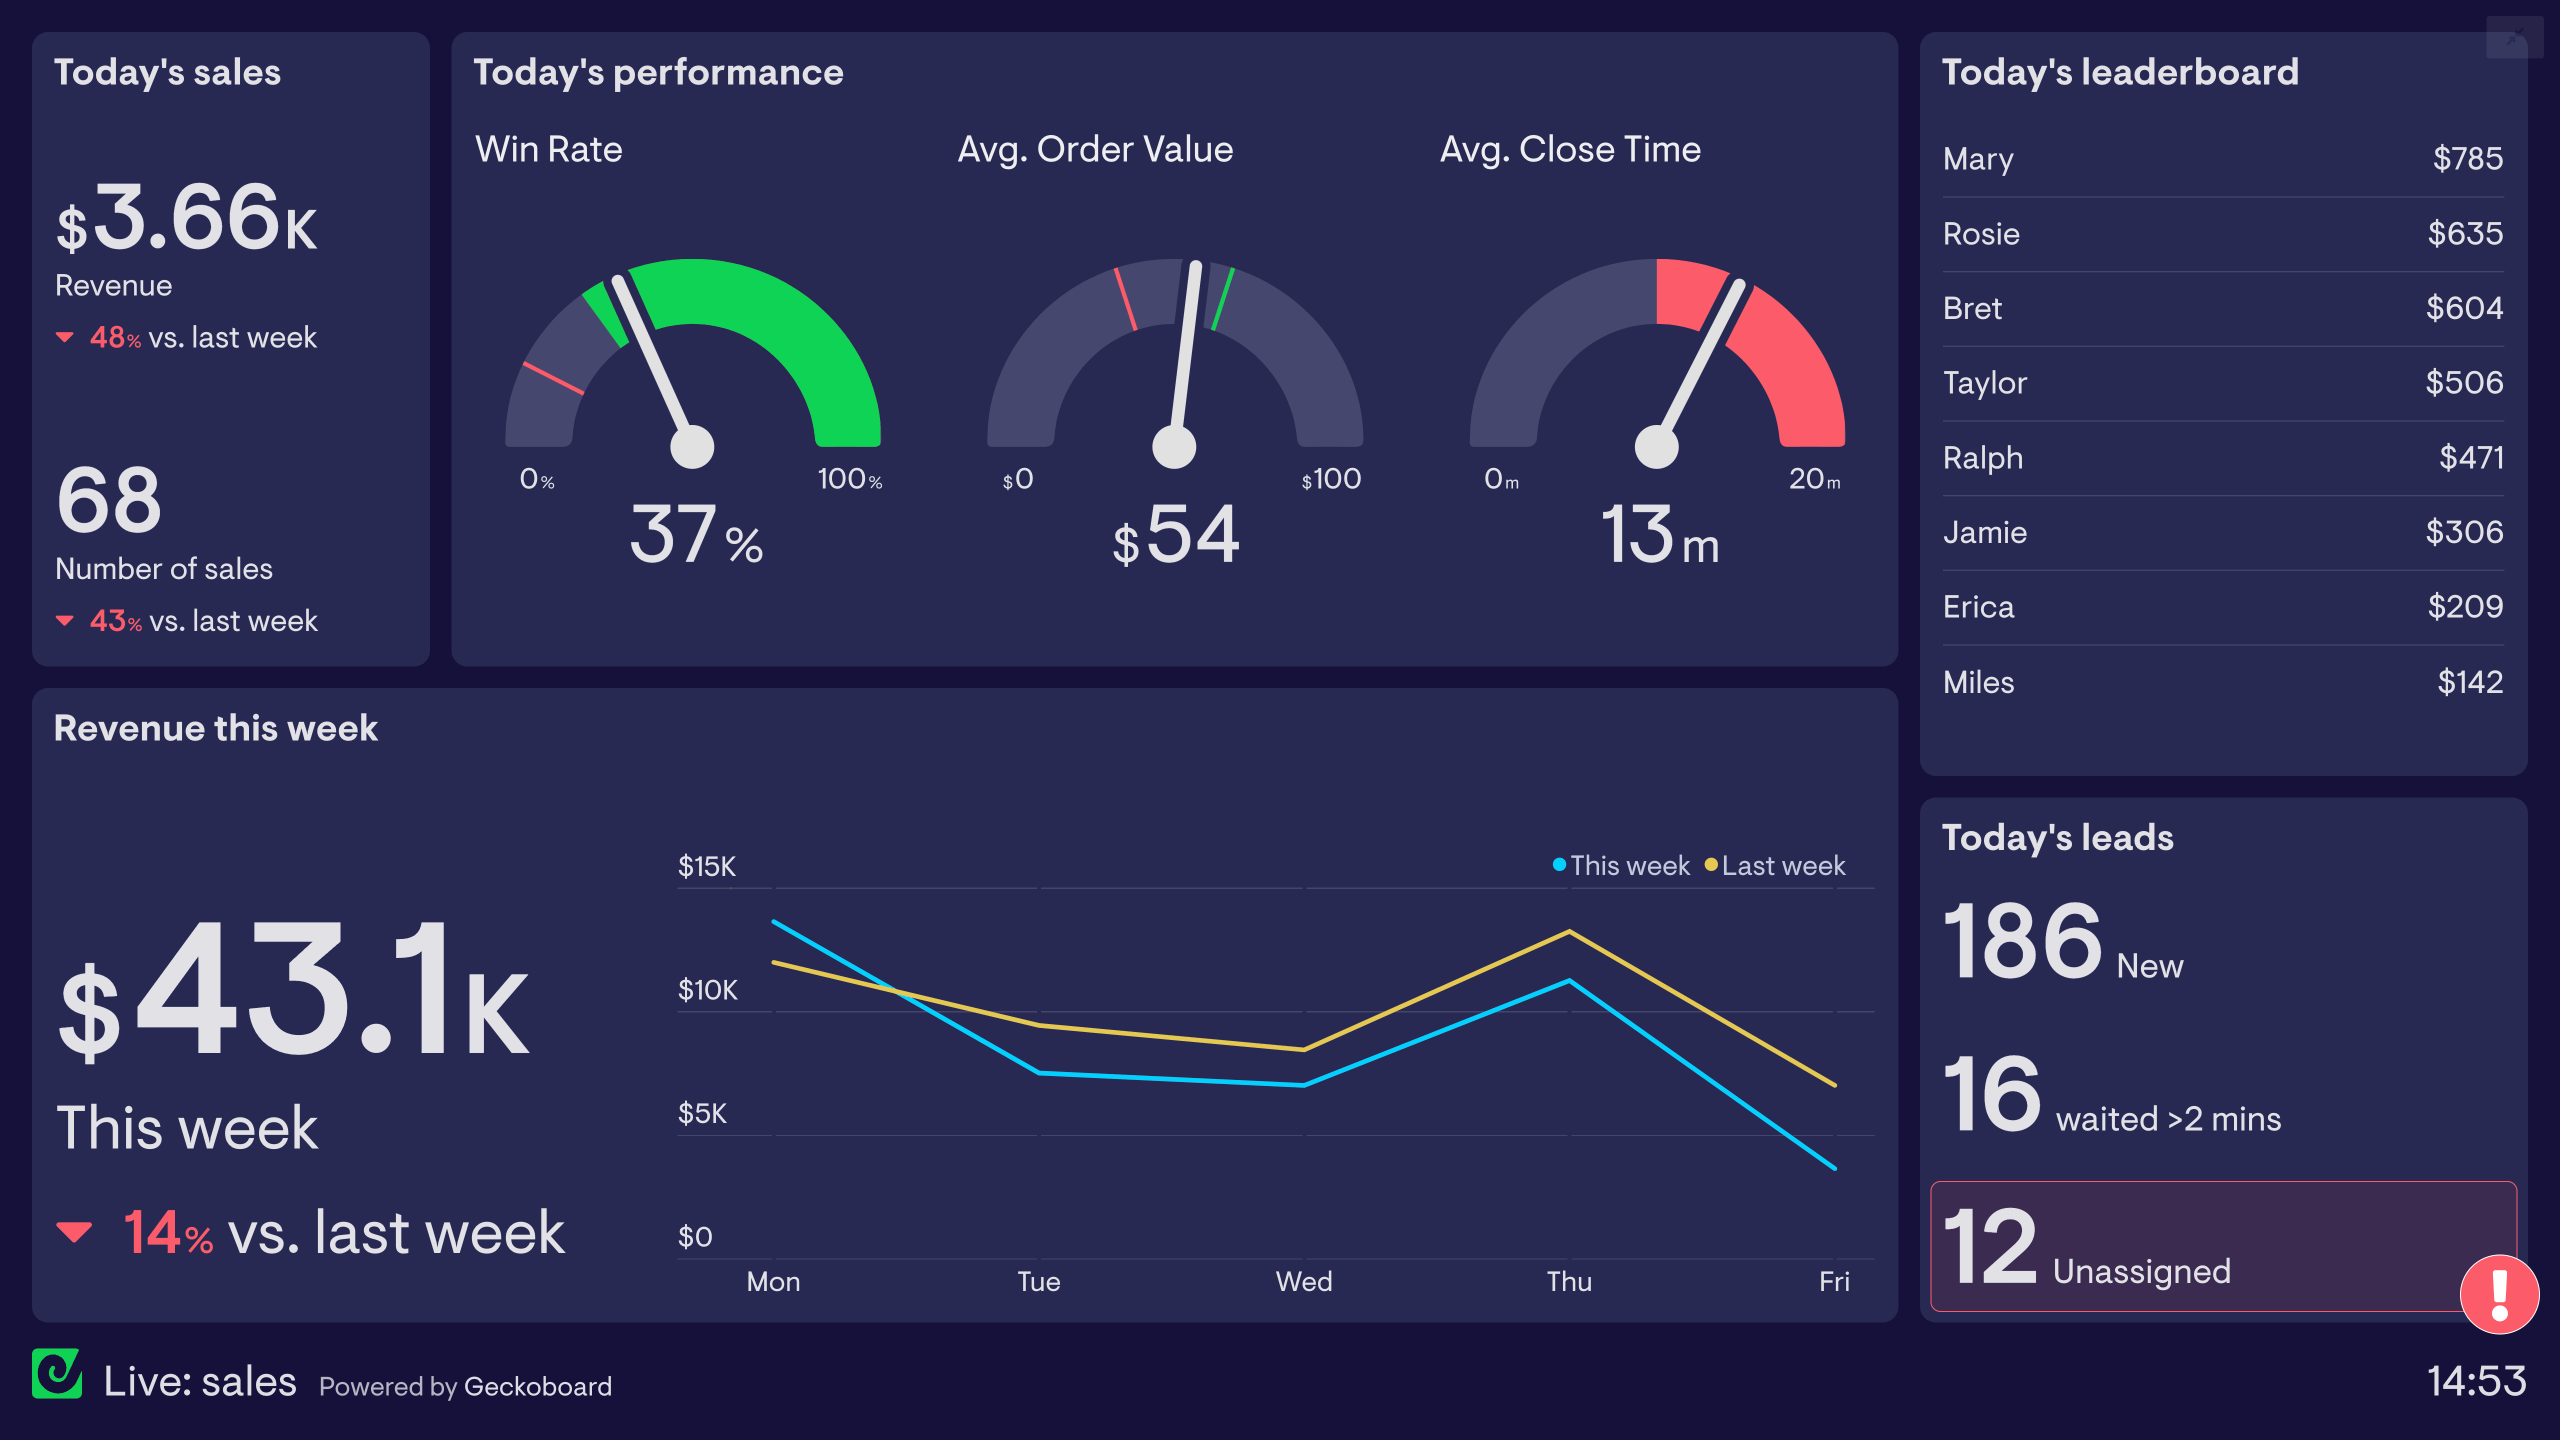 Example of a live dashboard used by a sales team